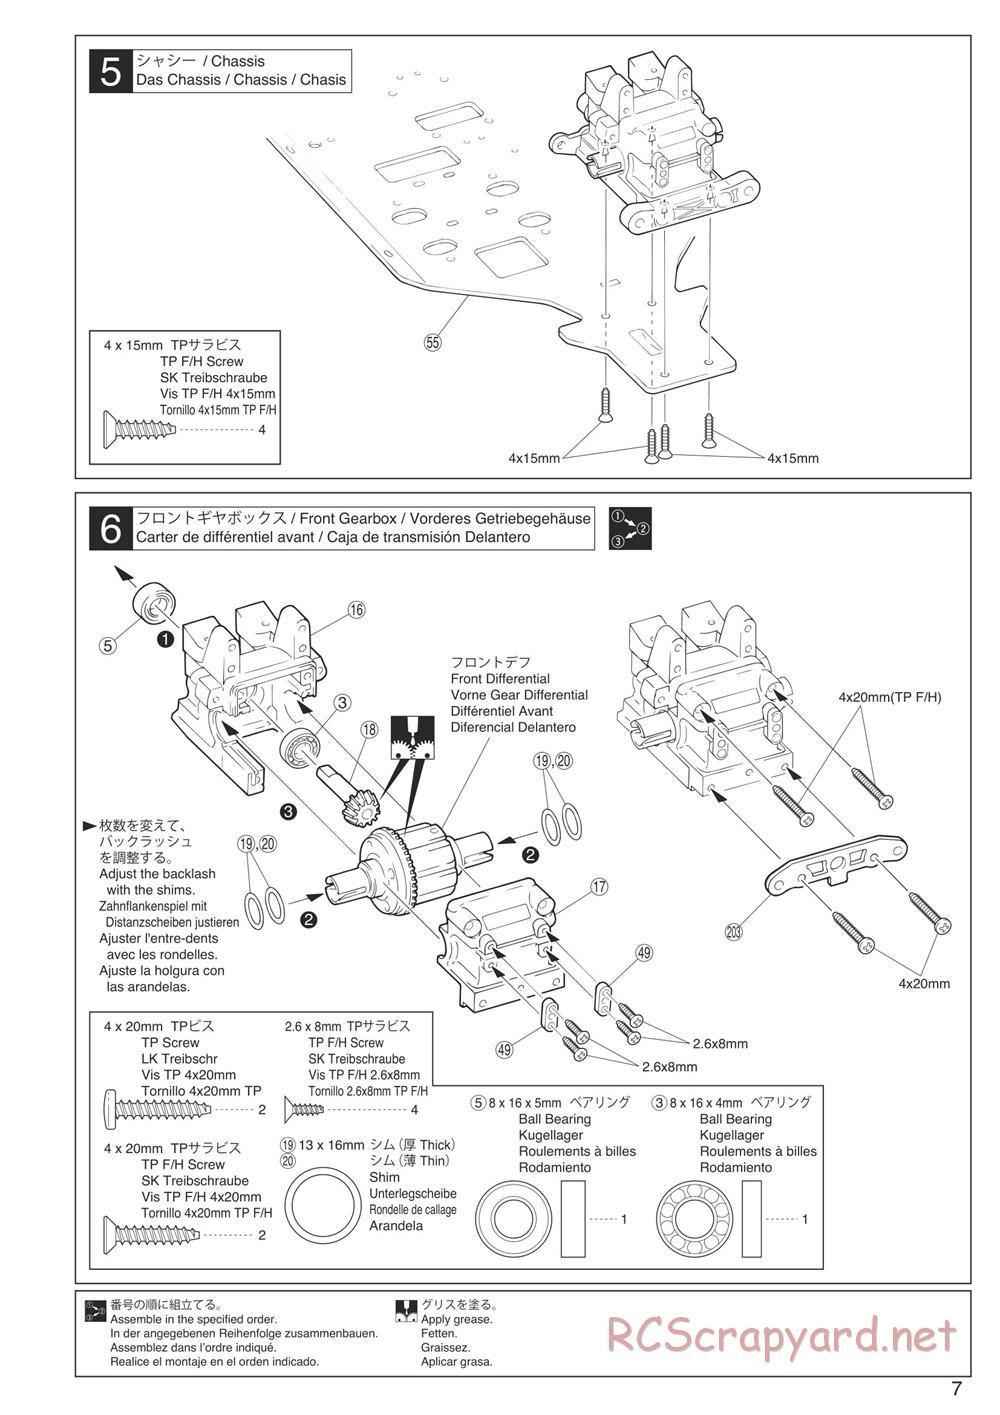 Kyosho - Inferno Neo - Manual - Page 7